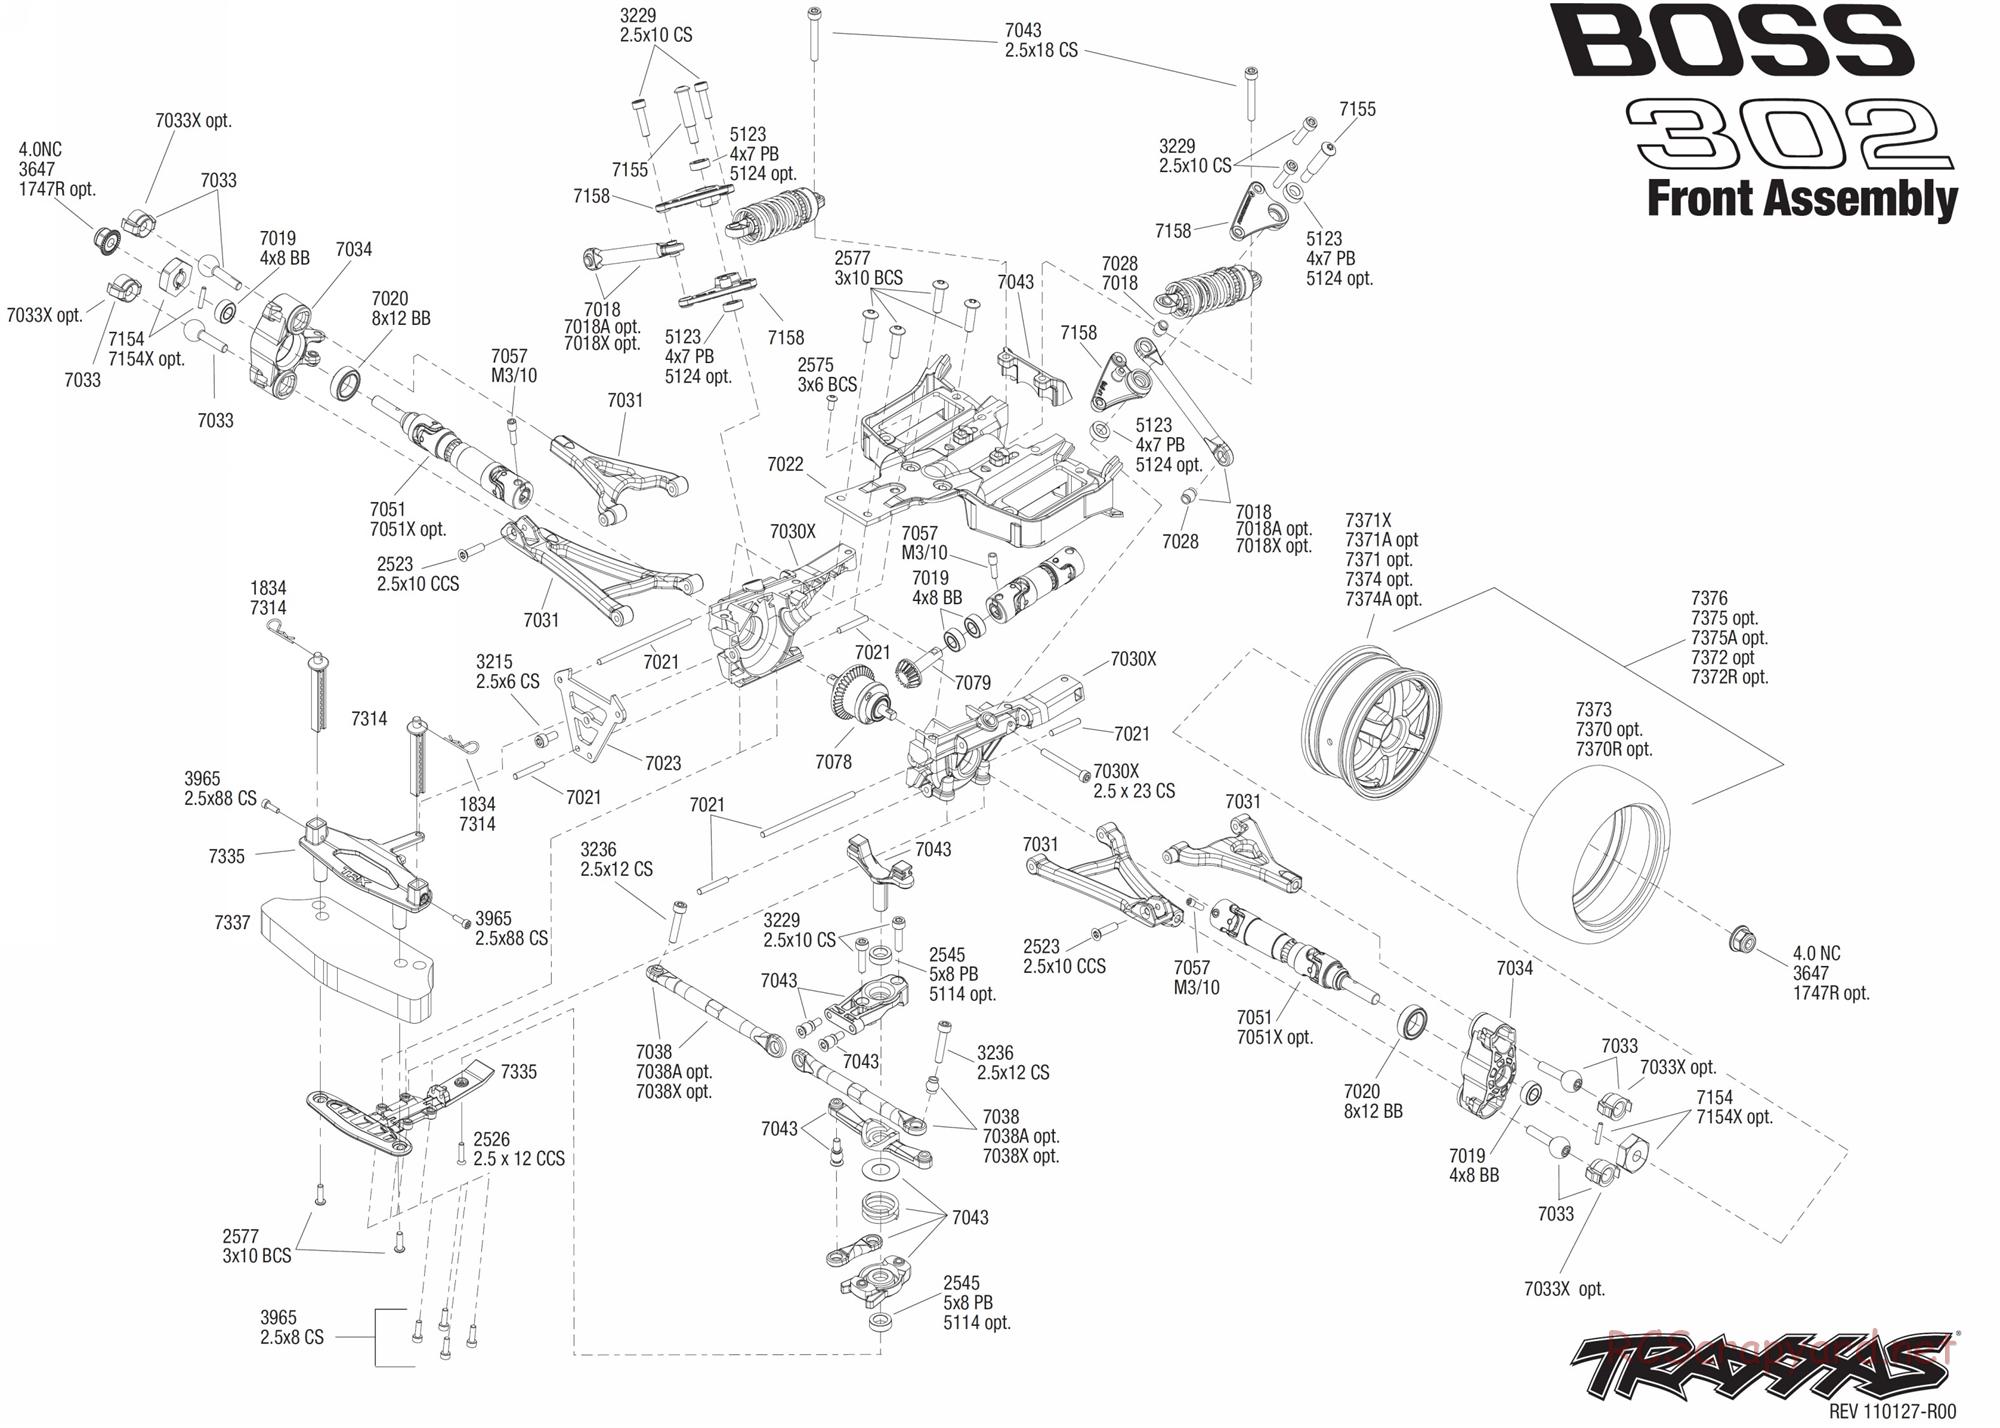 Traxxas - 1/16 Ford Mustang Boss 302 (2011) - Exploded Views - Page 3